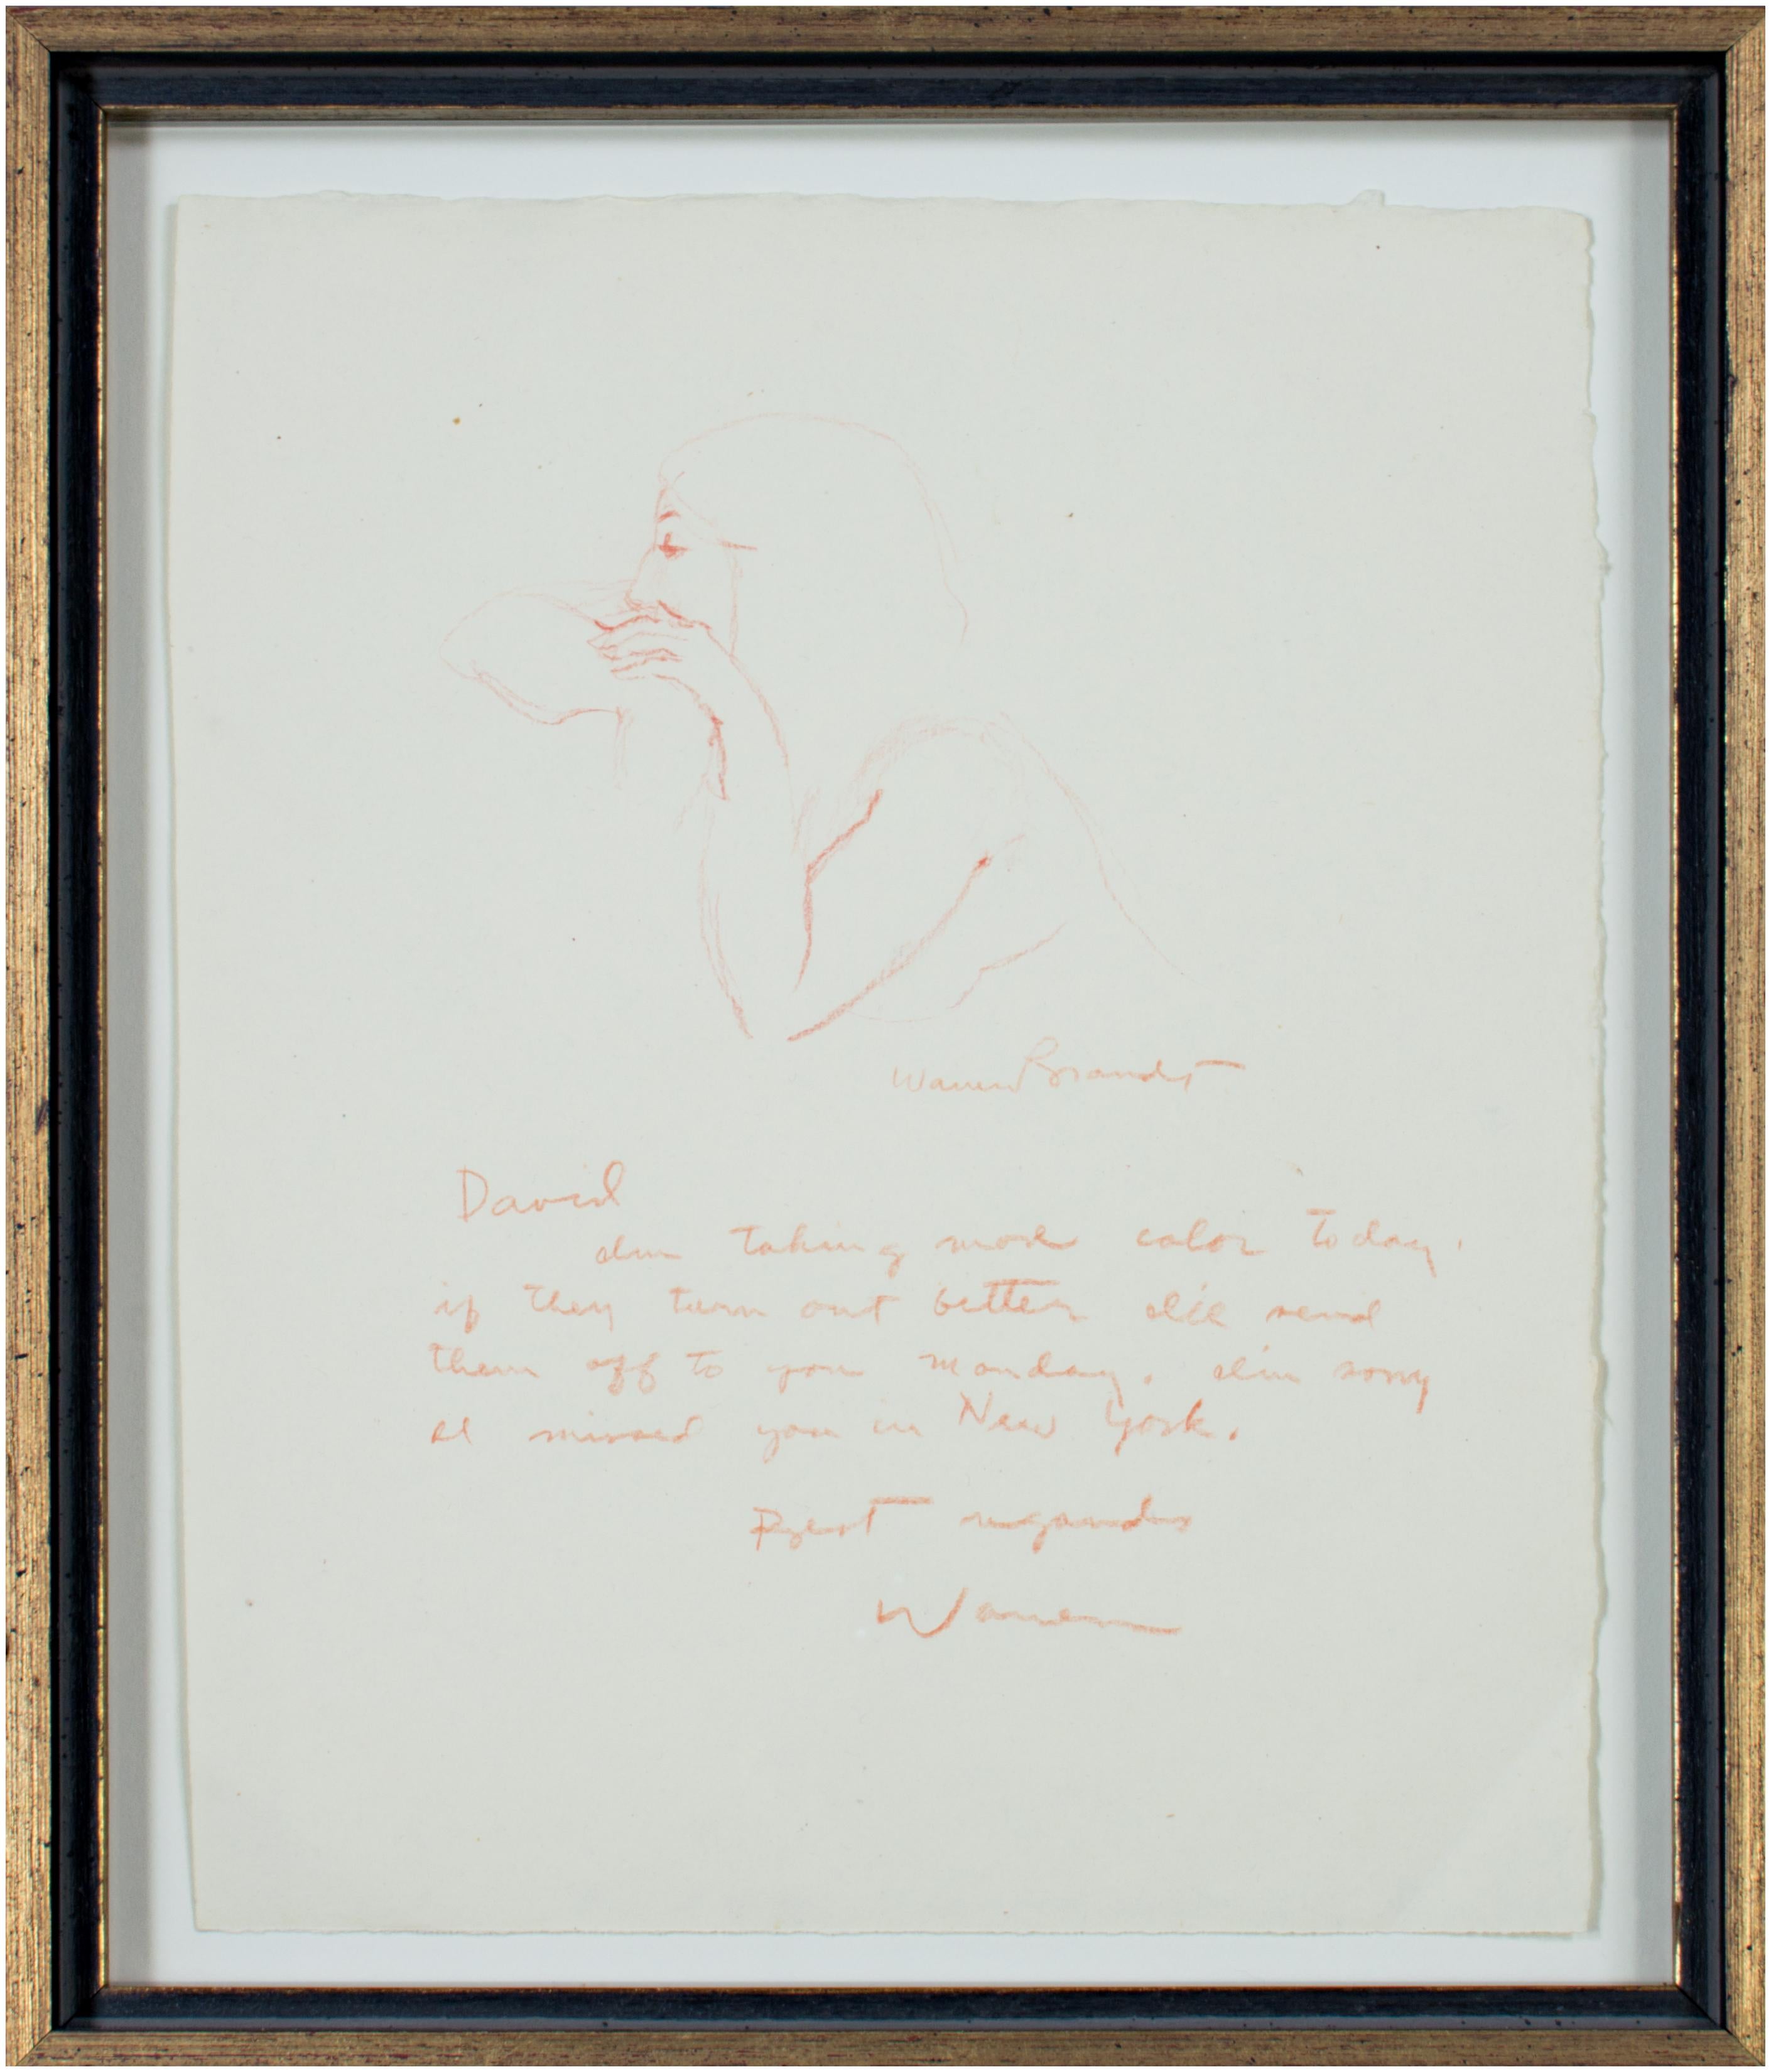 The present drawing is a subtle and intimate work by an artist best known for his colorful still lifes and interior scenes. In the image, a young woman rests on the back of a chair. Below is a handwritten letter from Brandt to the Milwaukee